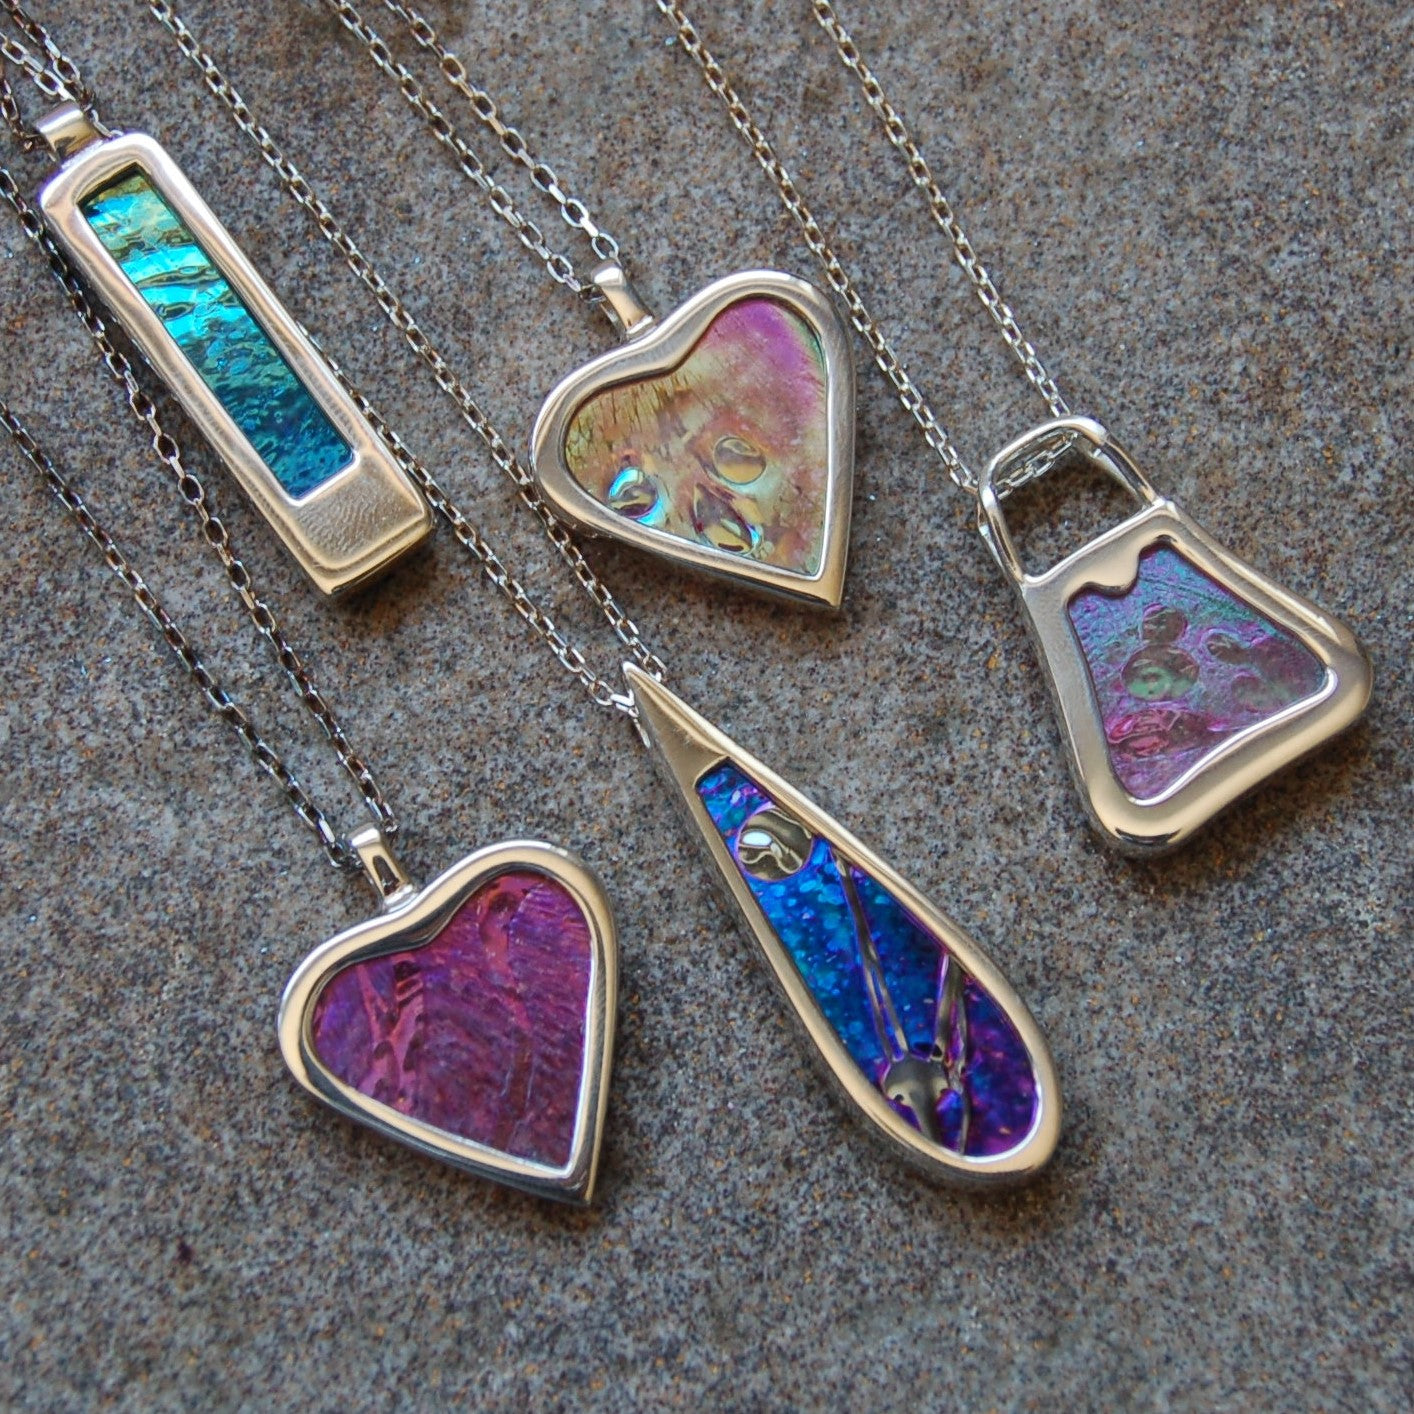 Hallmarked sterling silver pendants with memorial glassand ashes @ £200 each.